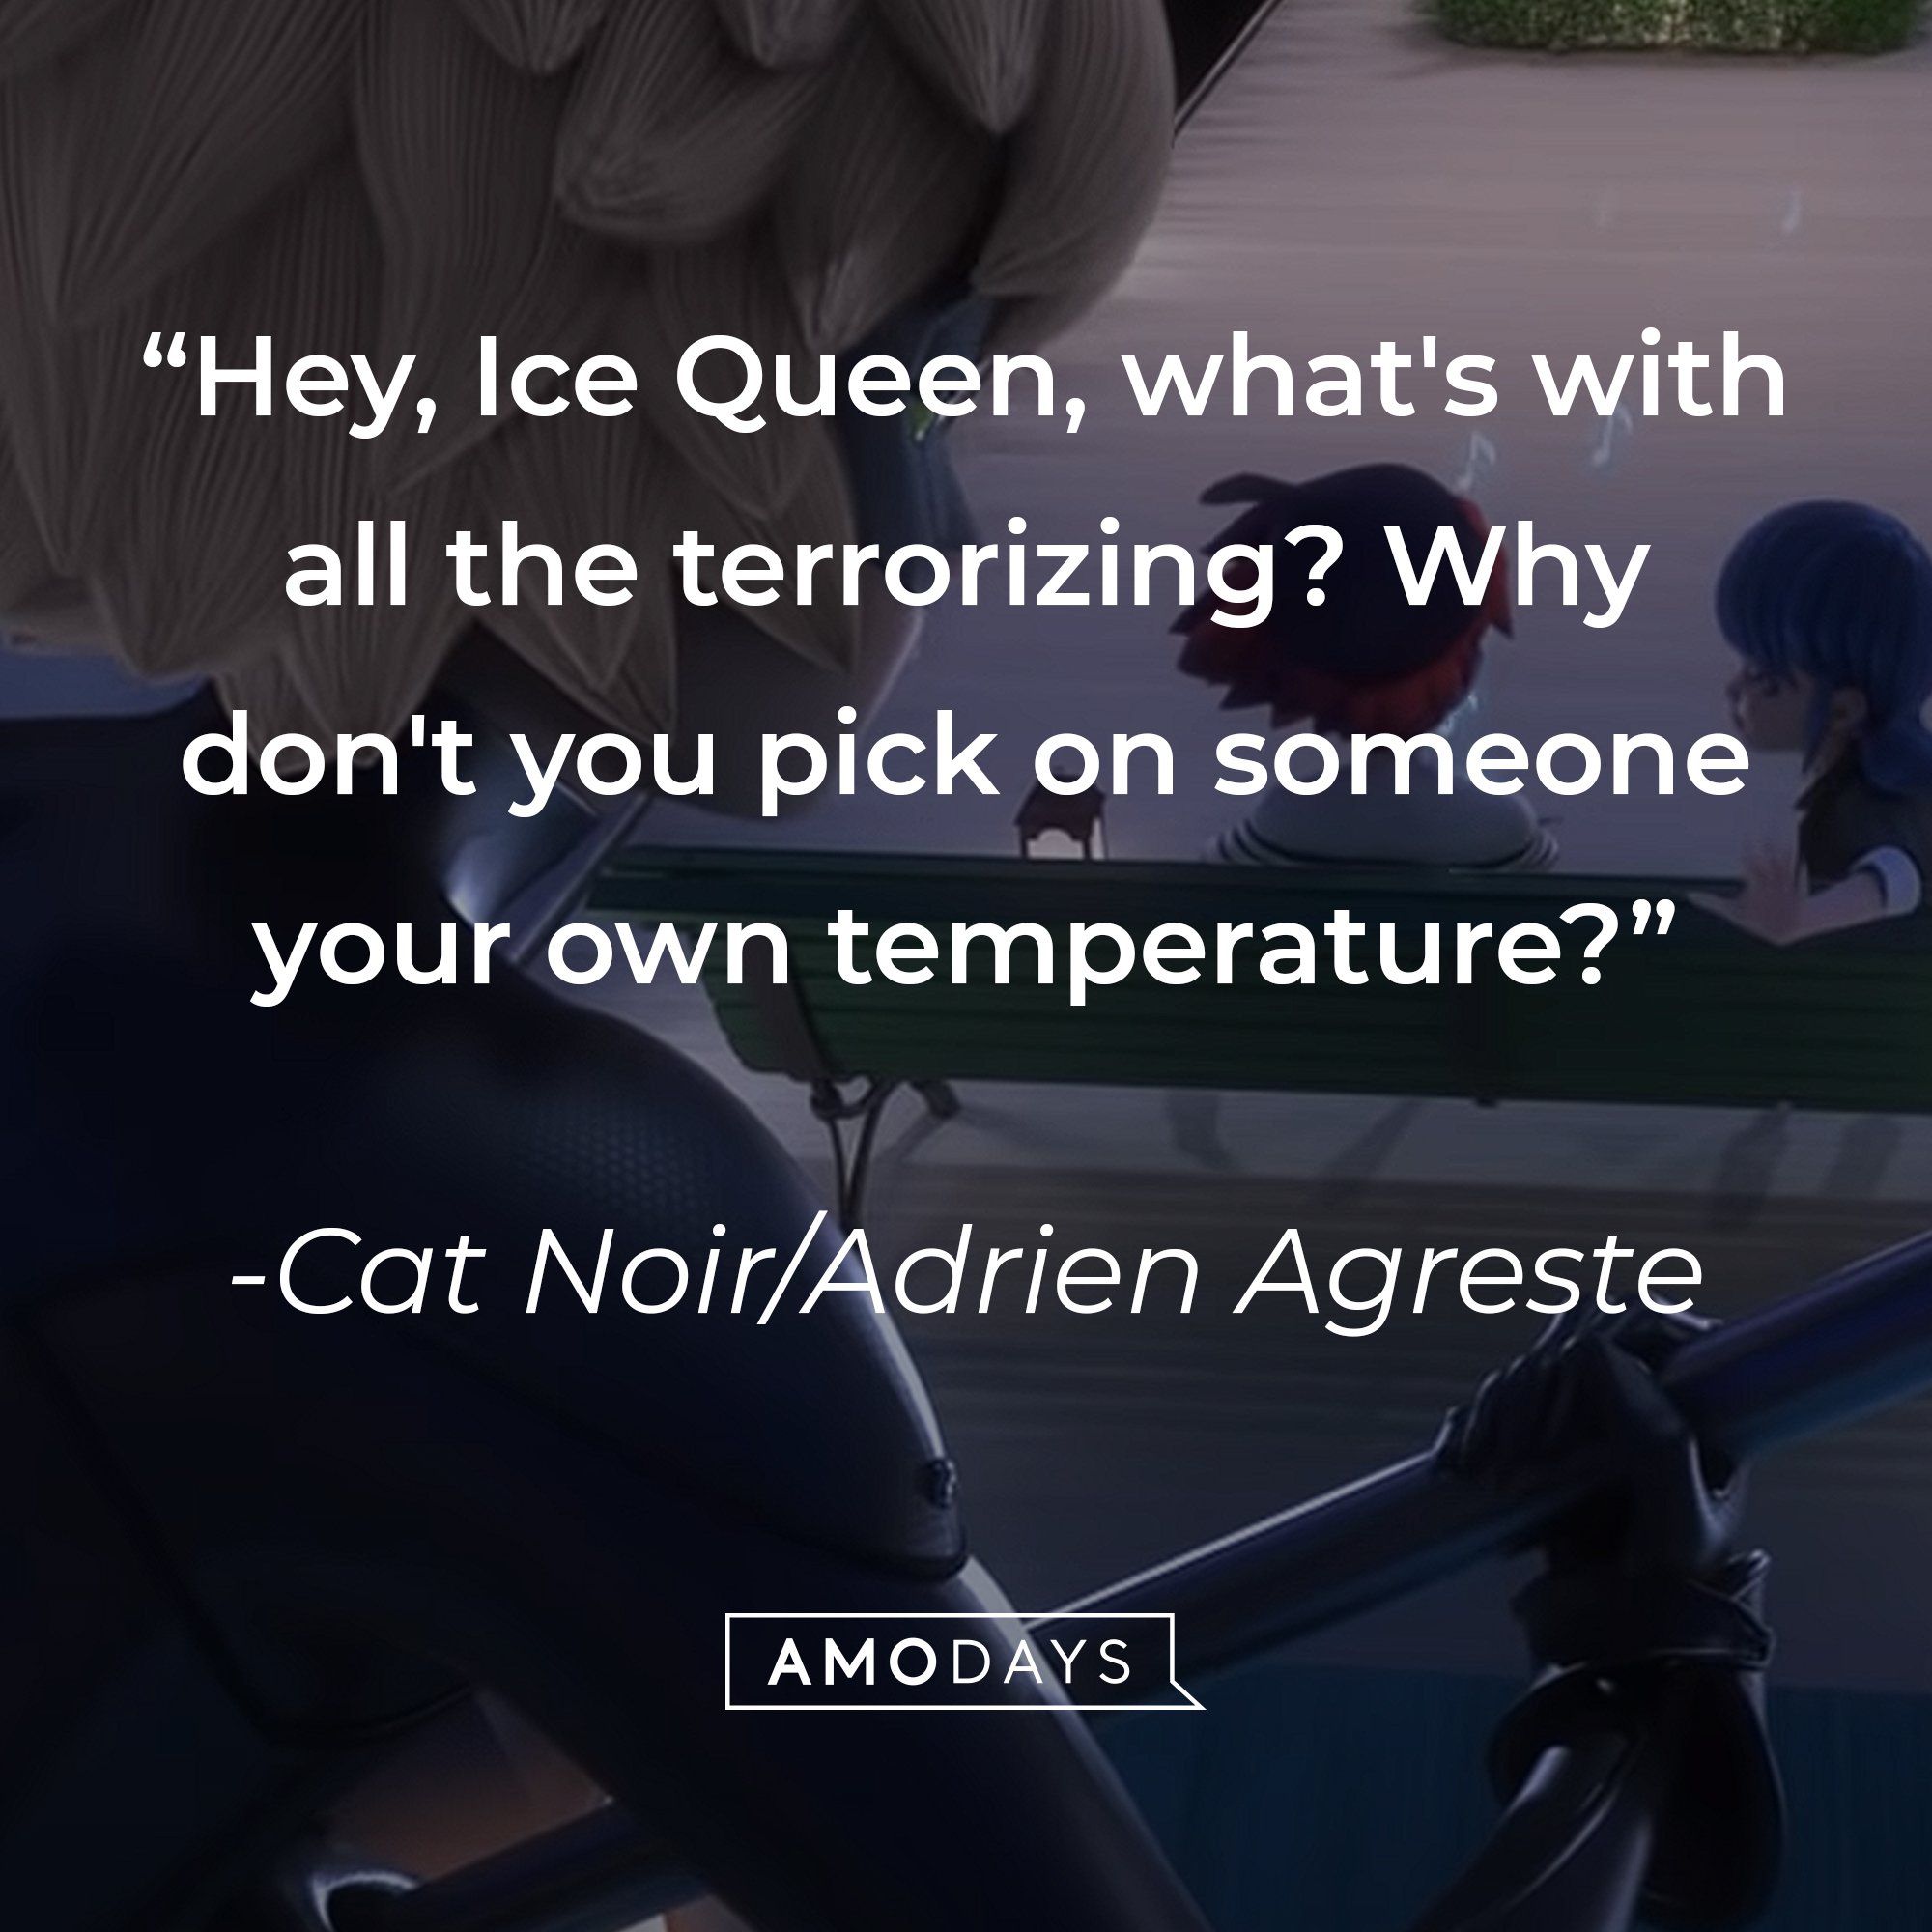 Cat Noir/Adrien Agreste’s quote: “Hey, Ice Queen, what's with all the terrorizing? Why don't you pick on someone your own temperature?” | Image: AmoDays 